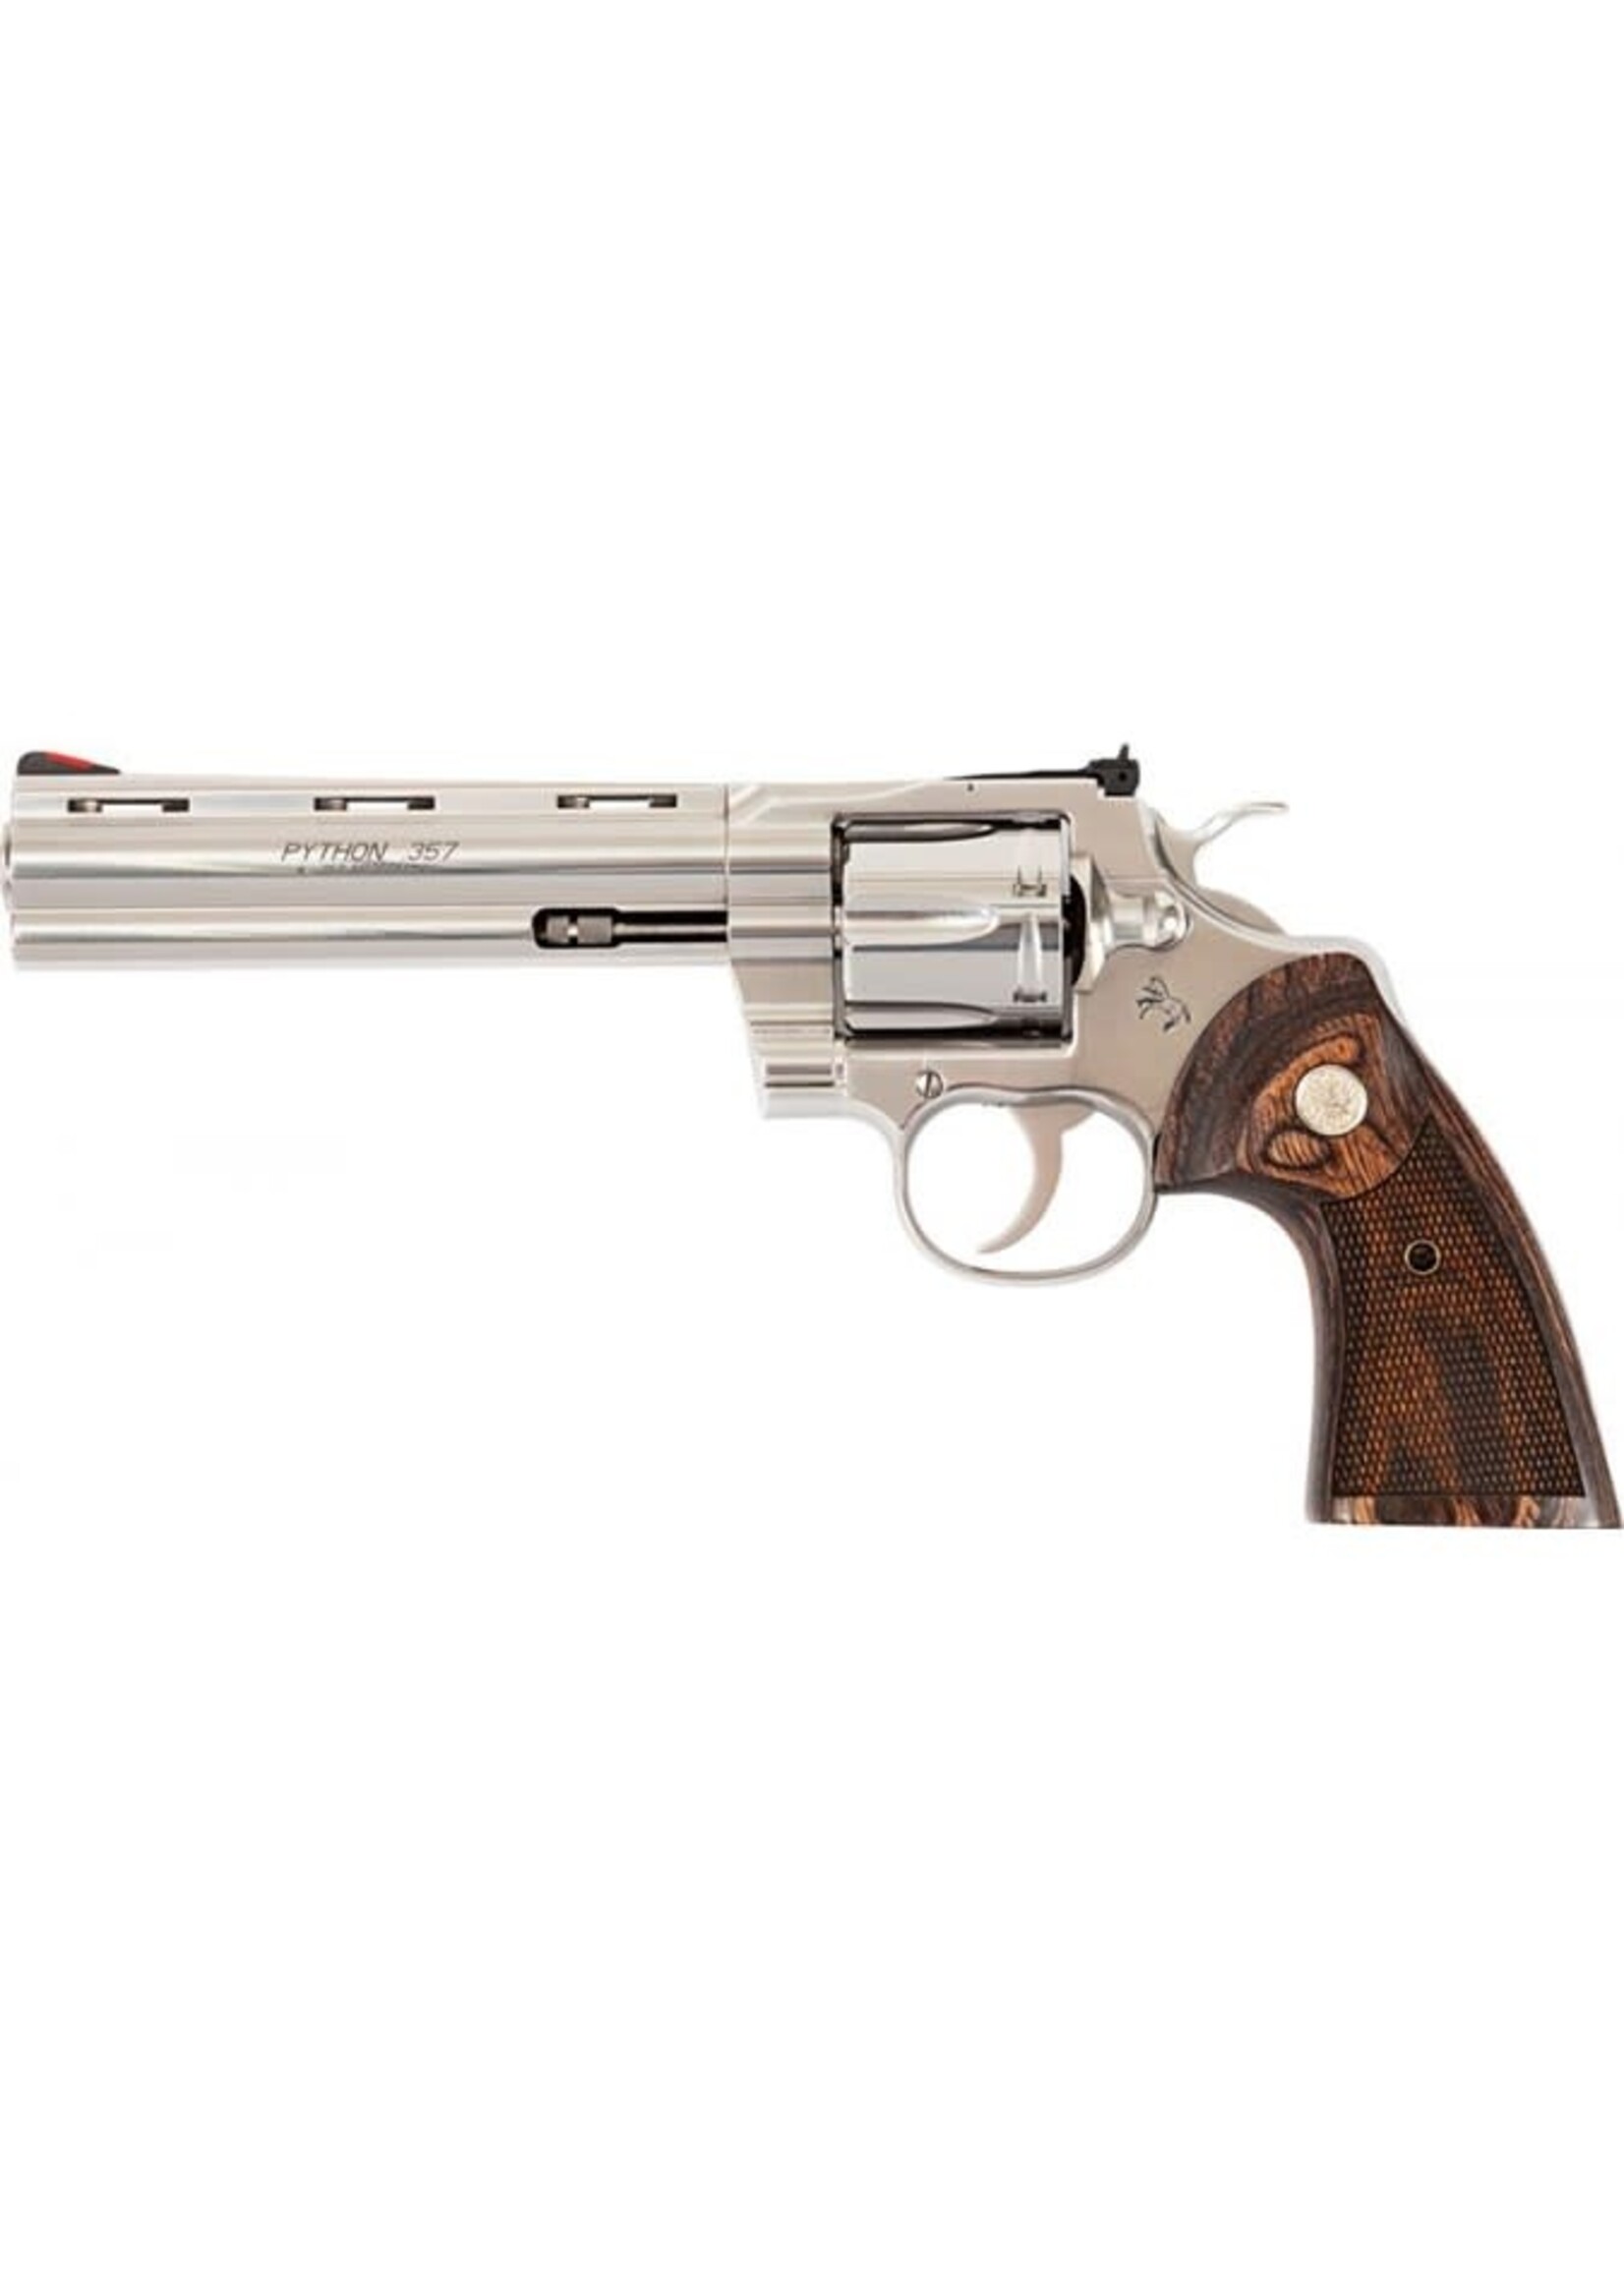 Colt Mfg Colt's Manufacturing, Python, Revolver, Double Action Only, 357 Magnum, 6" Barrel, Steel, Stainless Finish, Walnut Grips, Red Ramp Front/Adjustable Rear Sight, 6 Rounds